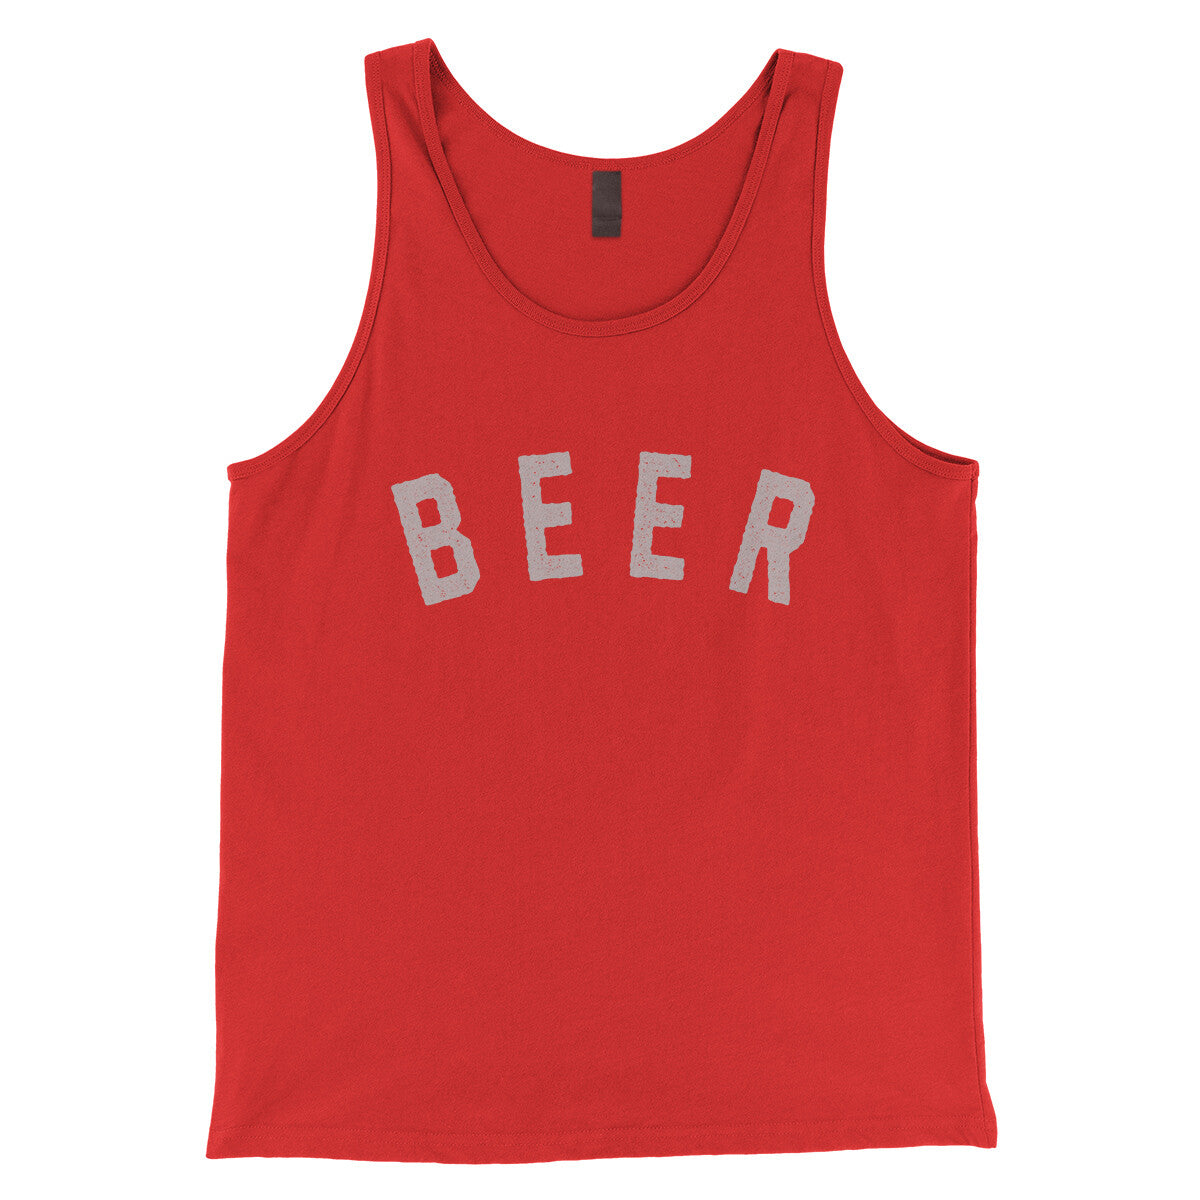 Beer in Red Color